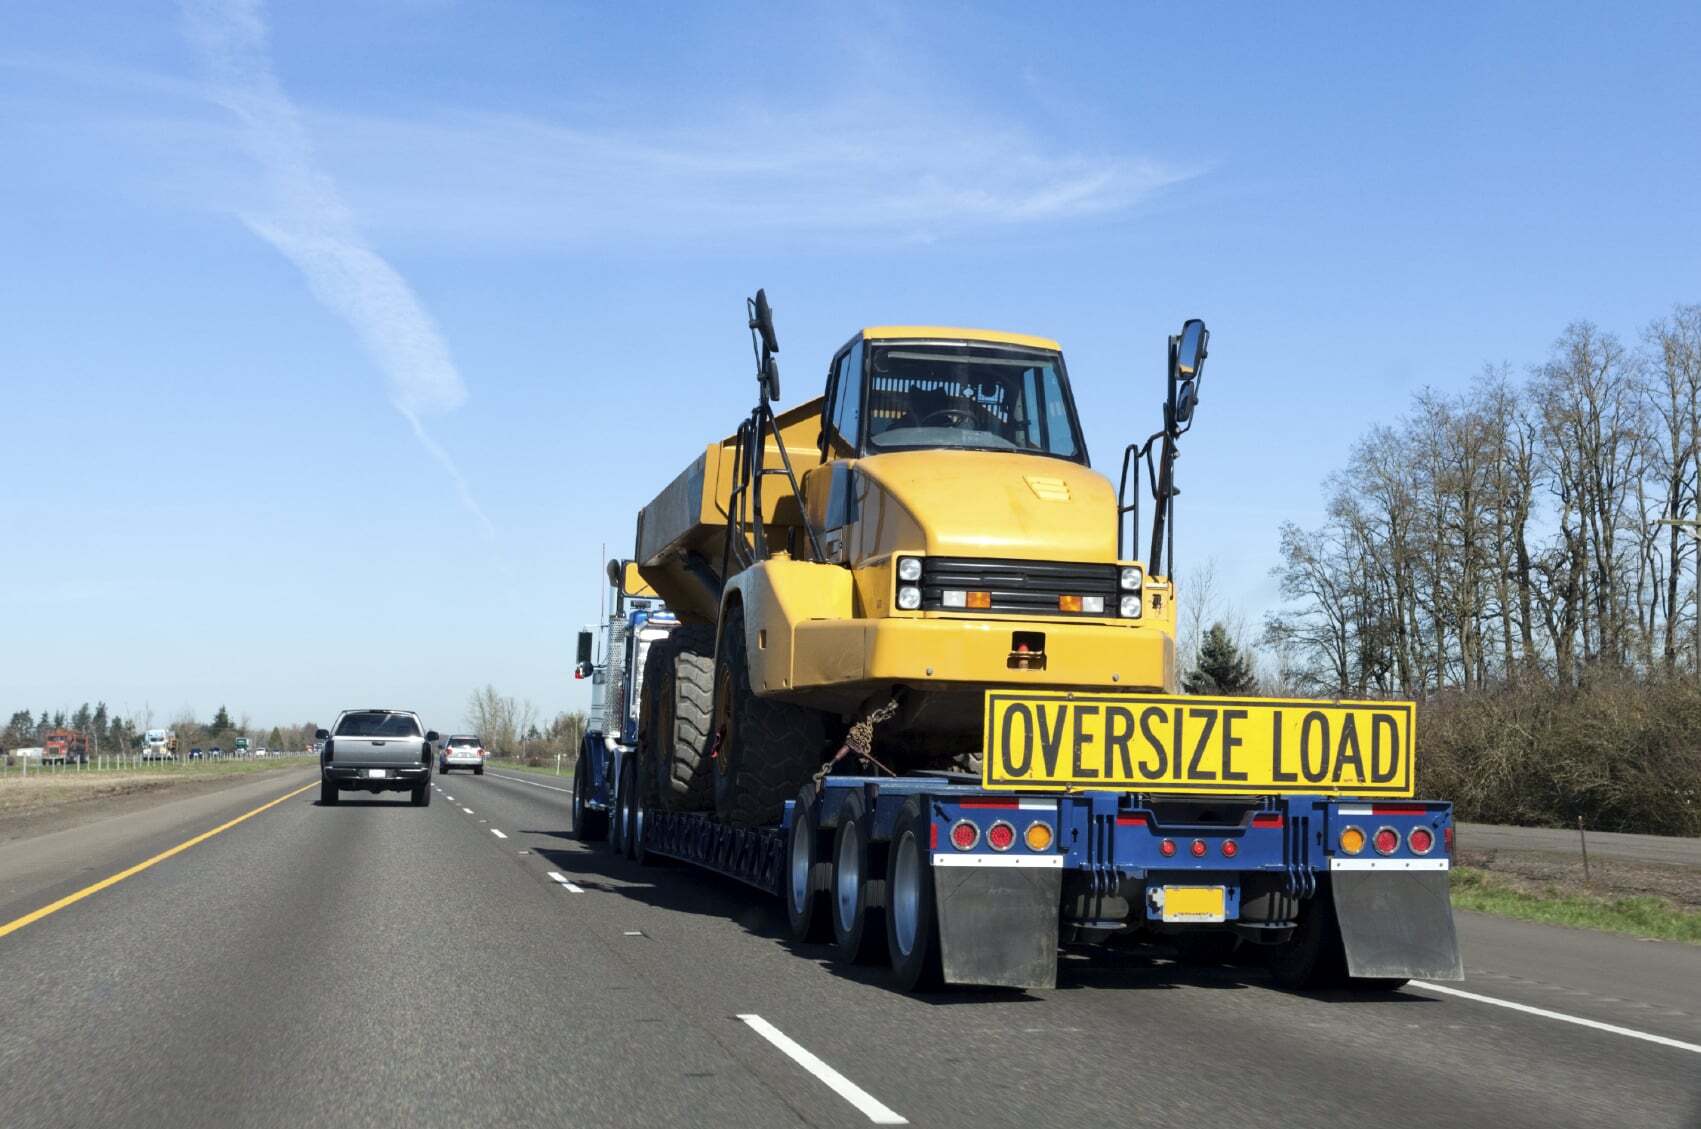 Oversize load being hauled on a lowboy trailer